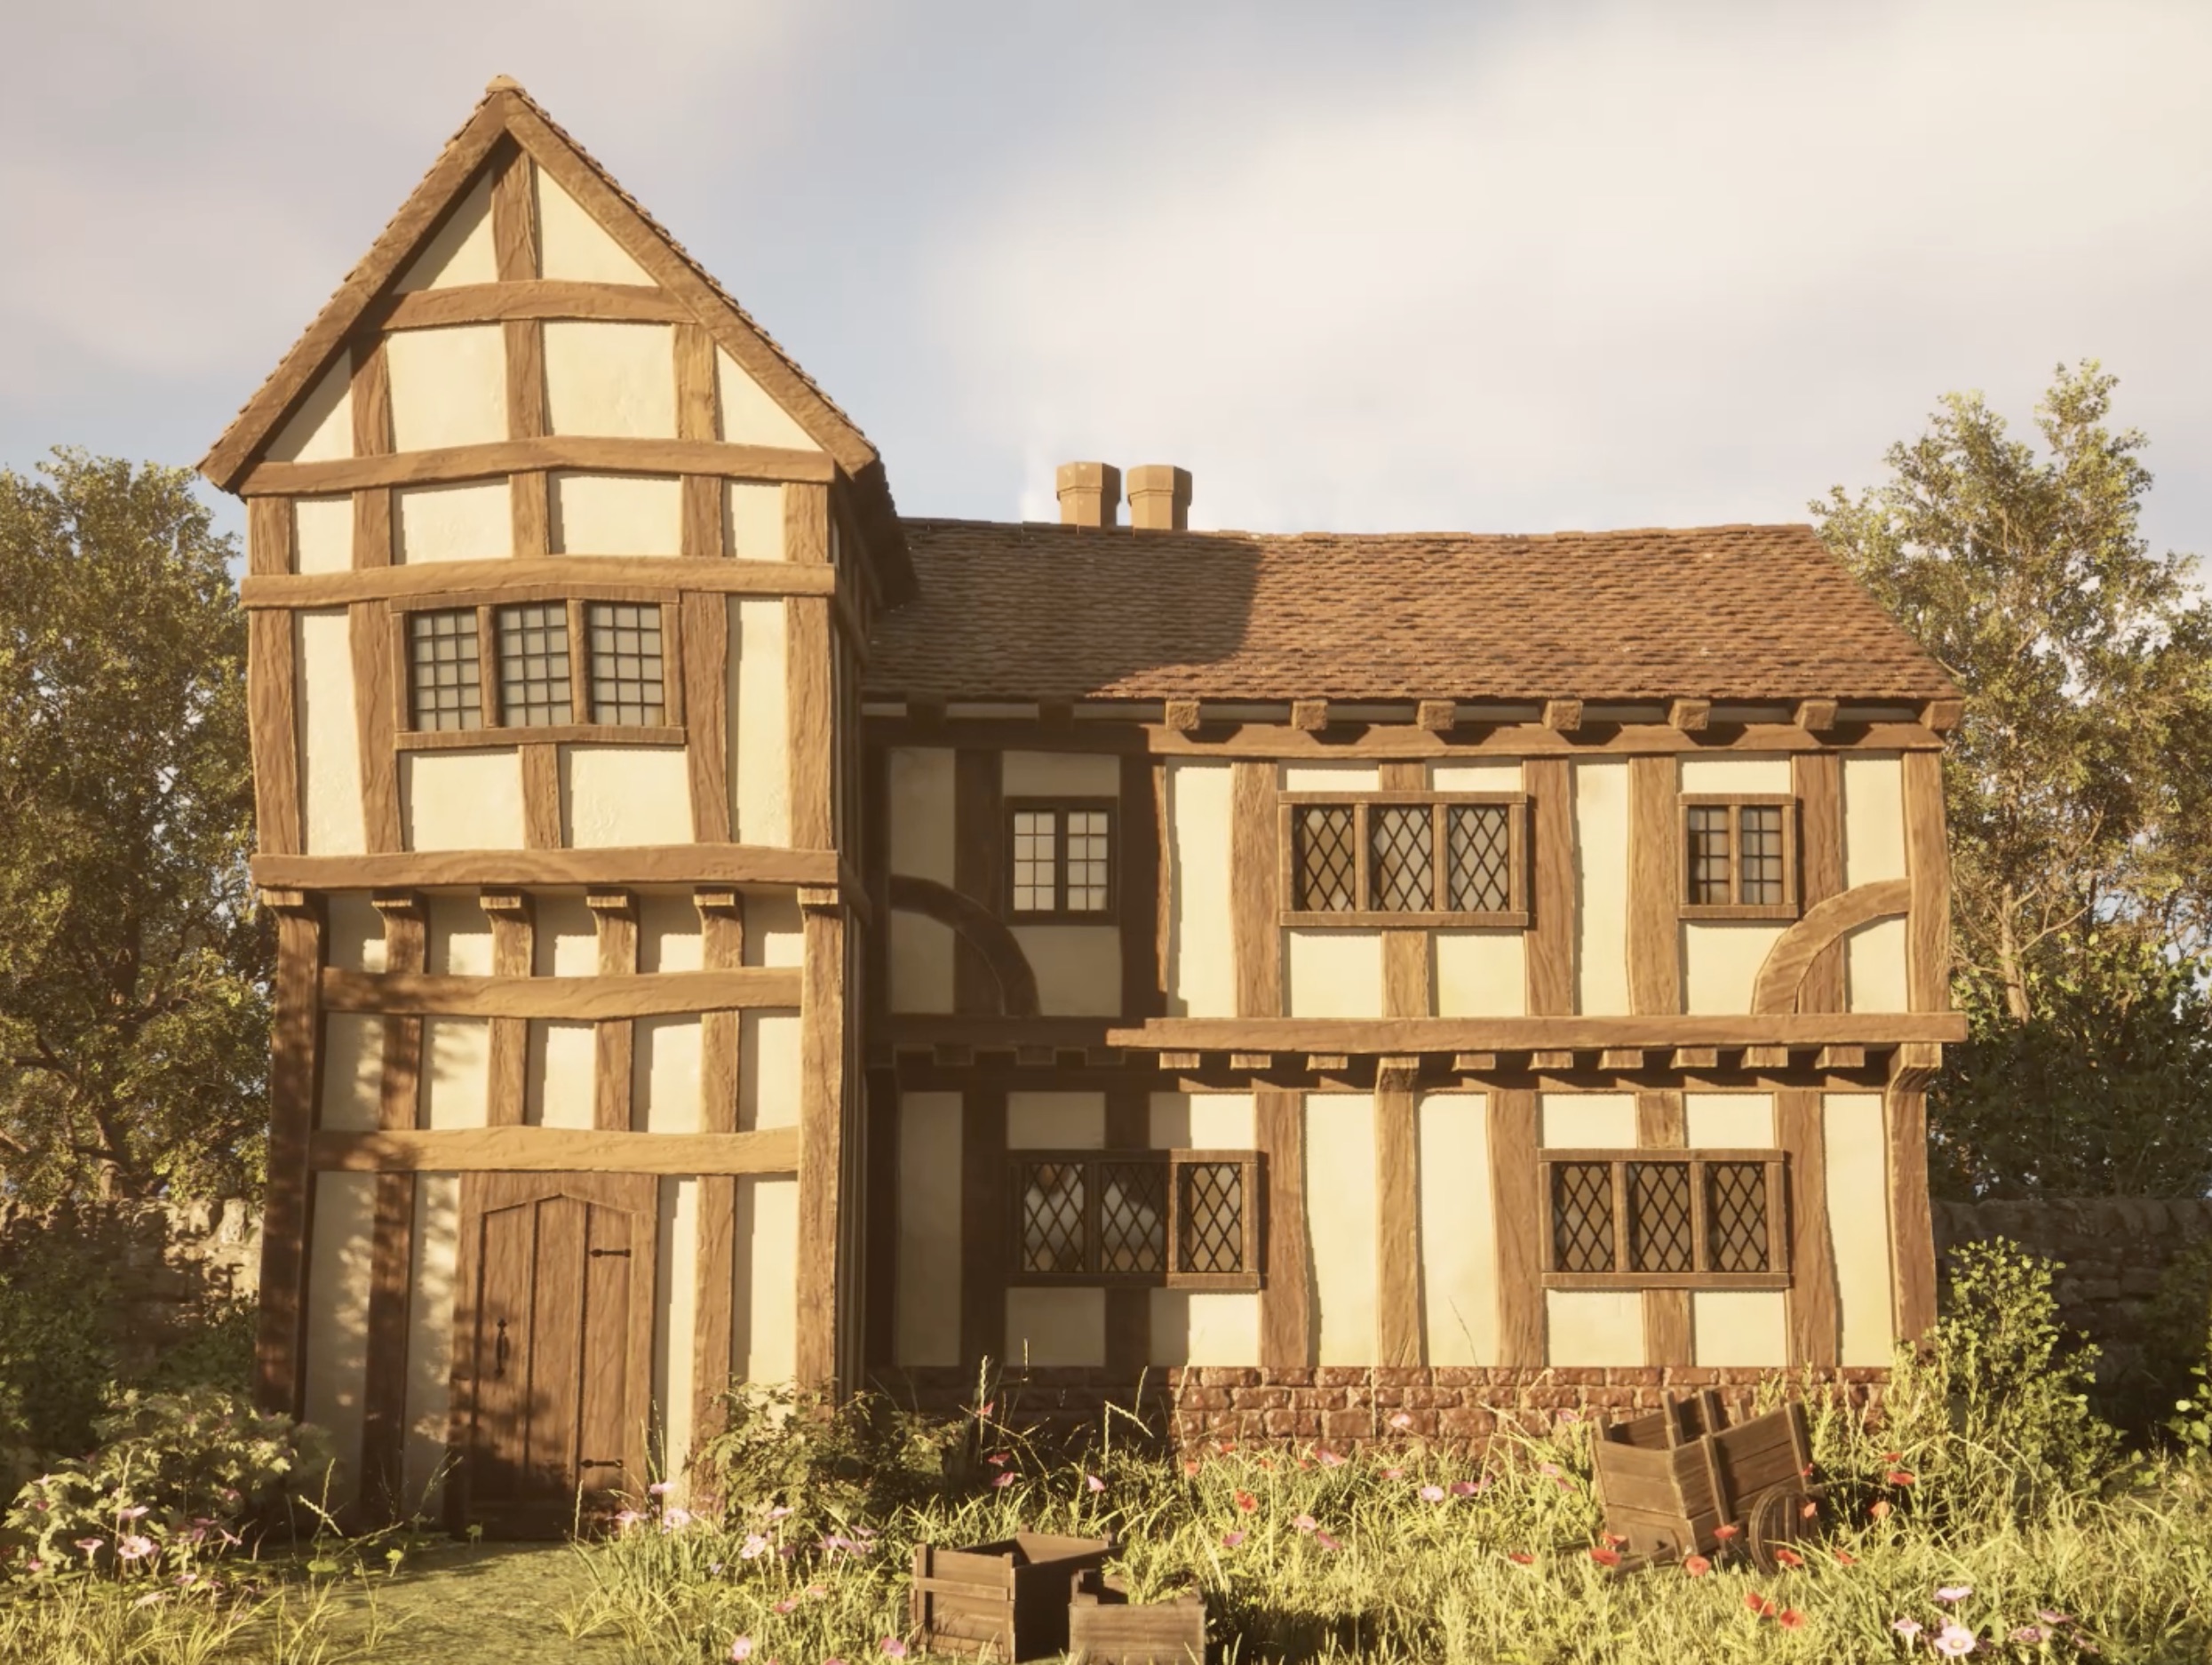 A Traditional Tudor House by Mia Godley, shows a rendered video of a Tudor house from many different angles, zooming in on the small details. It also shows a crate full of apples and a small wooden cart.